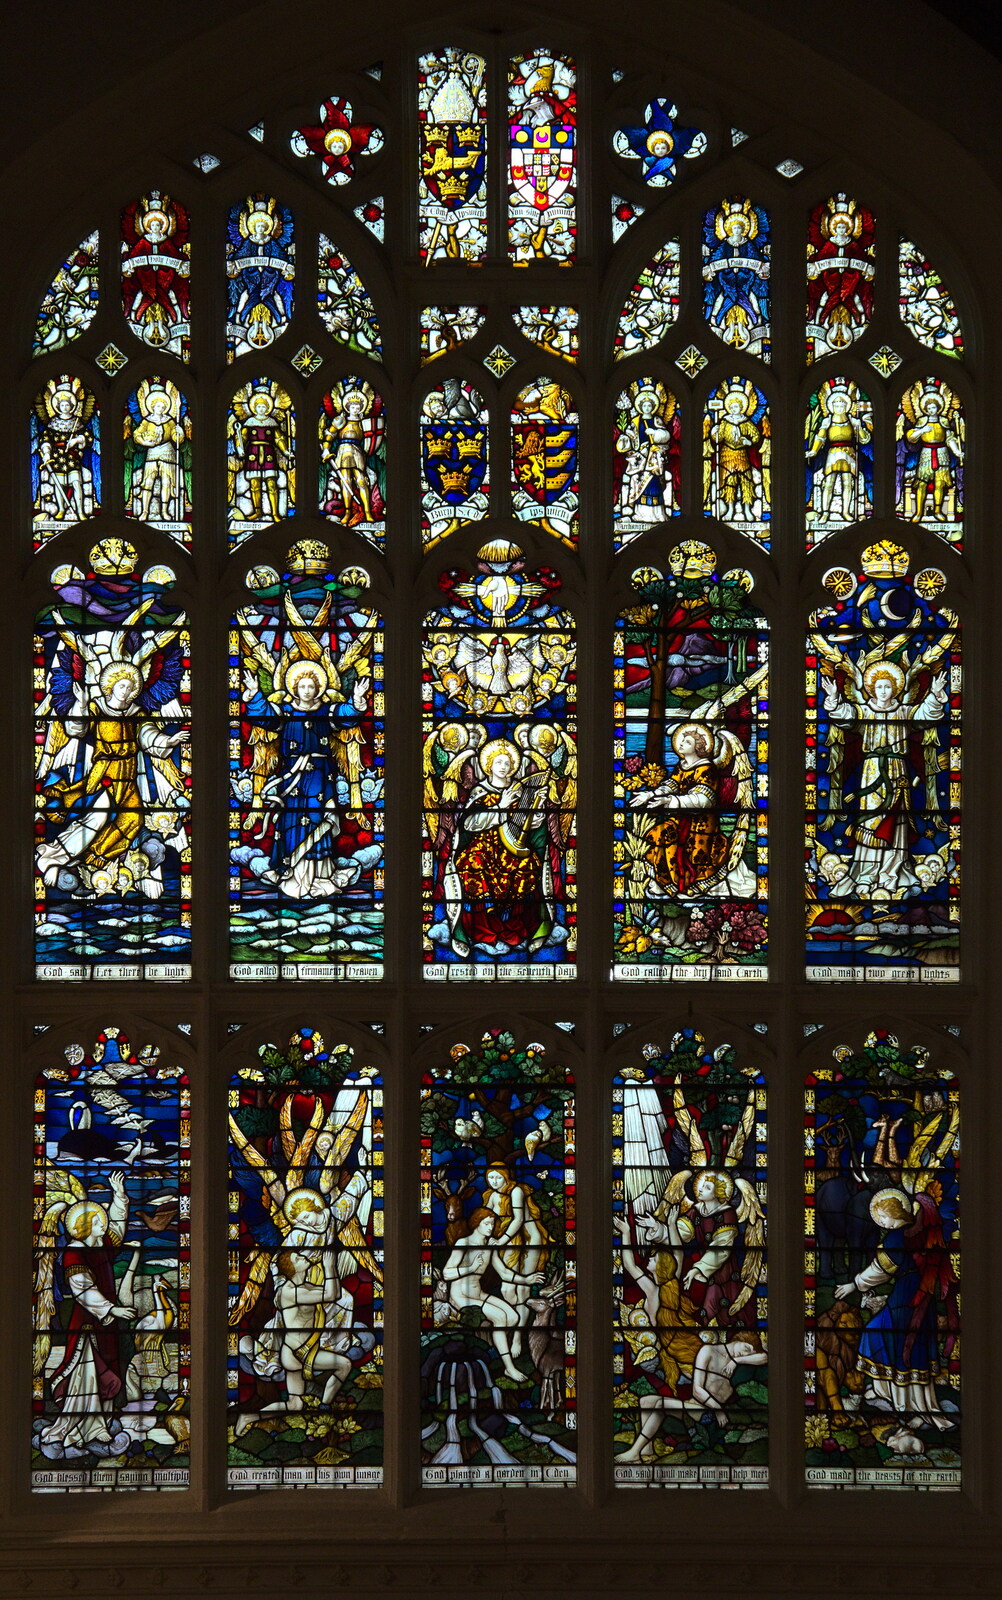 A stained glass window in the nave from St. Edmundsbury Cathedral, Bury St. Edmunds, Suffolk - 14th October 2022